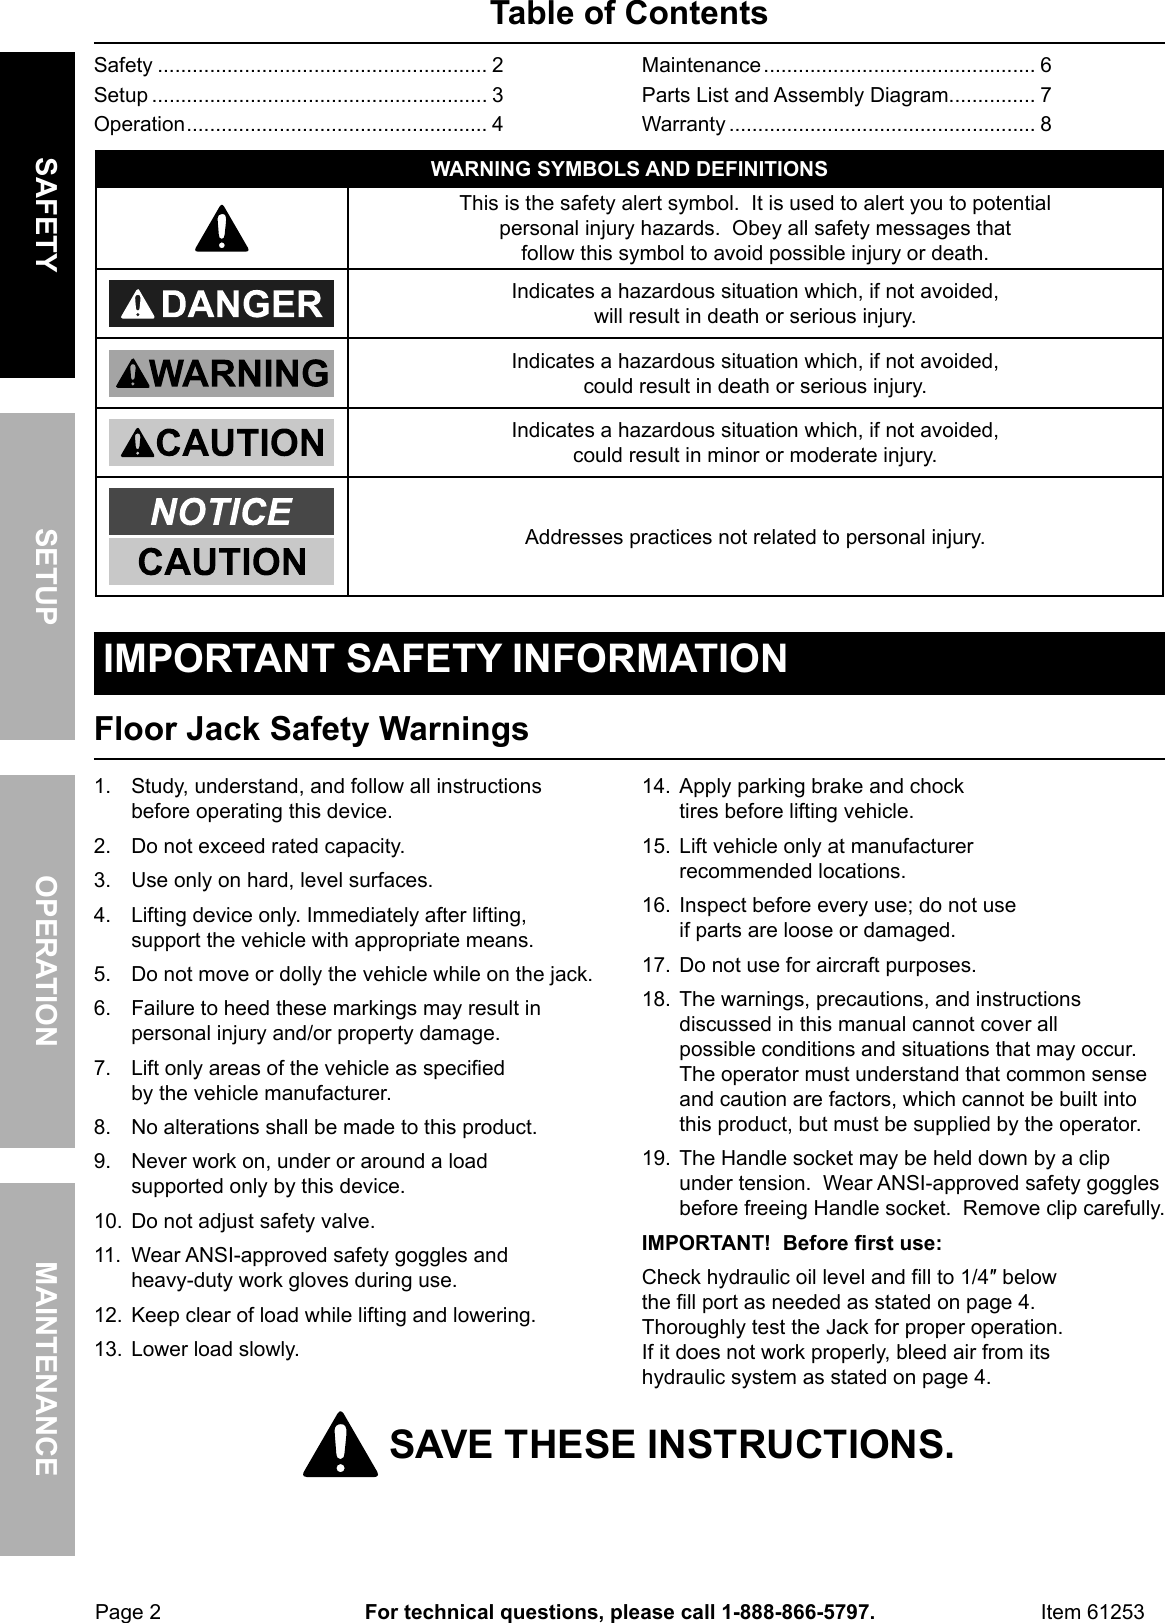 Page 2 of 8 - Manual For The 61253 3 Ton Low Profile Steel Heavy Duty Floor Jack With Rapid Pump®